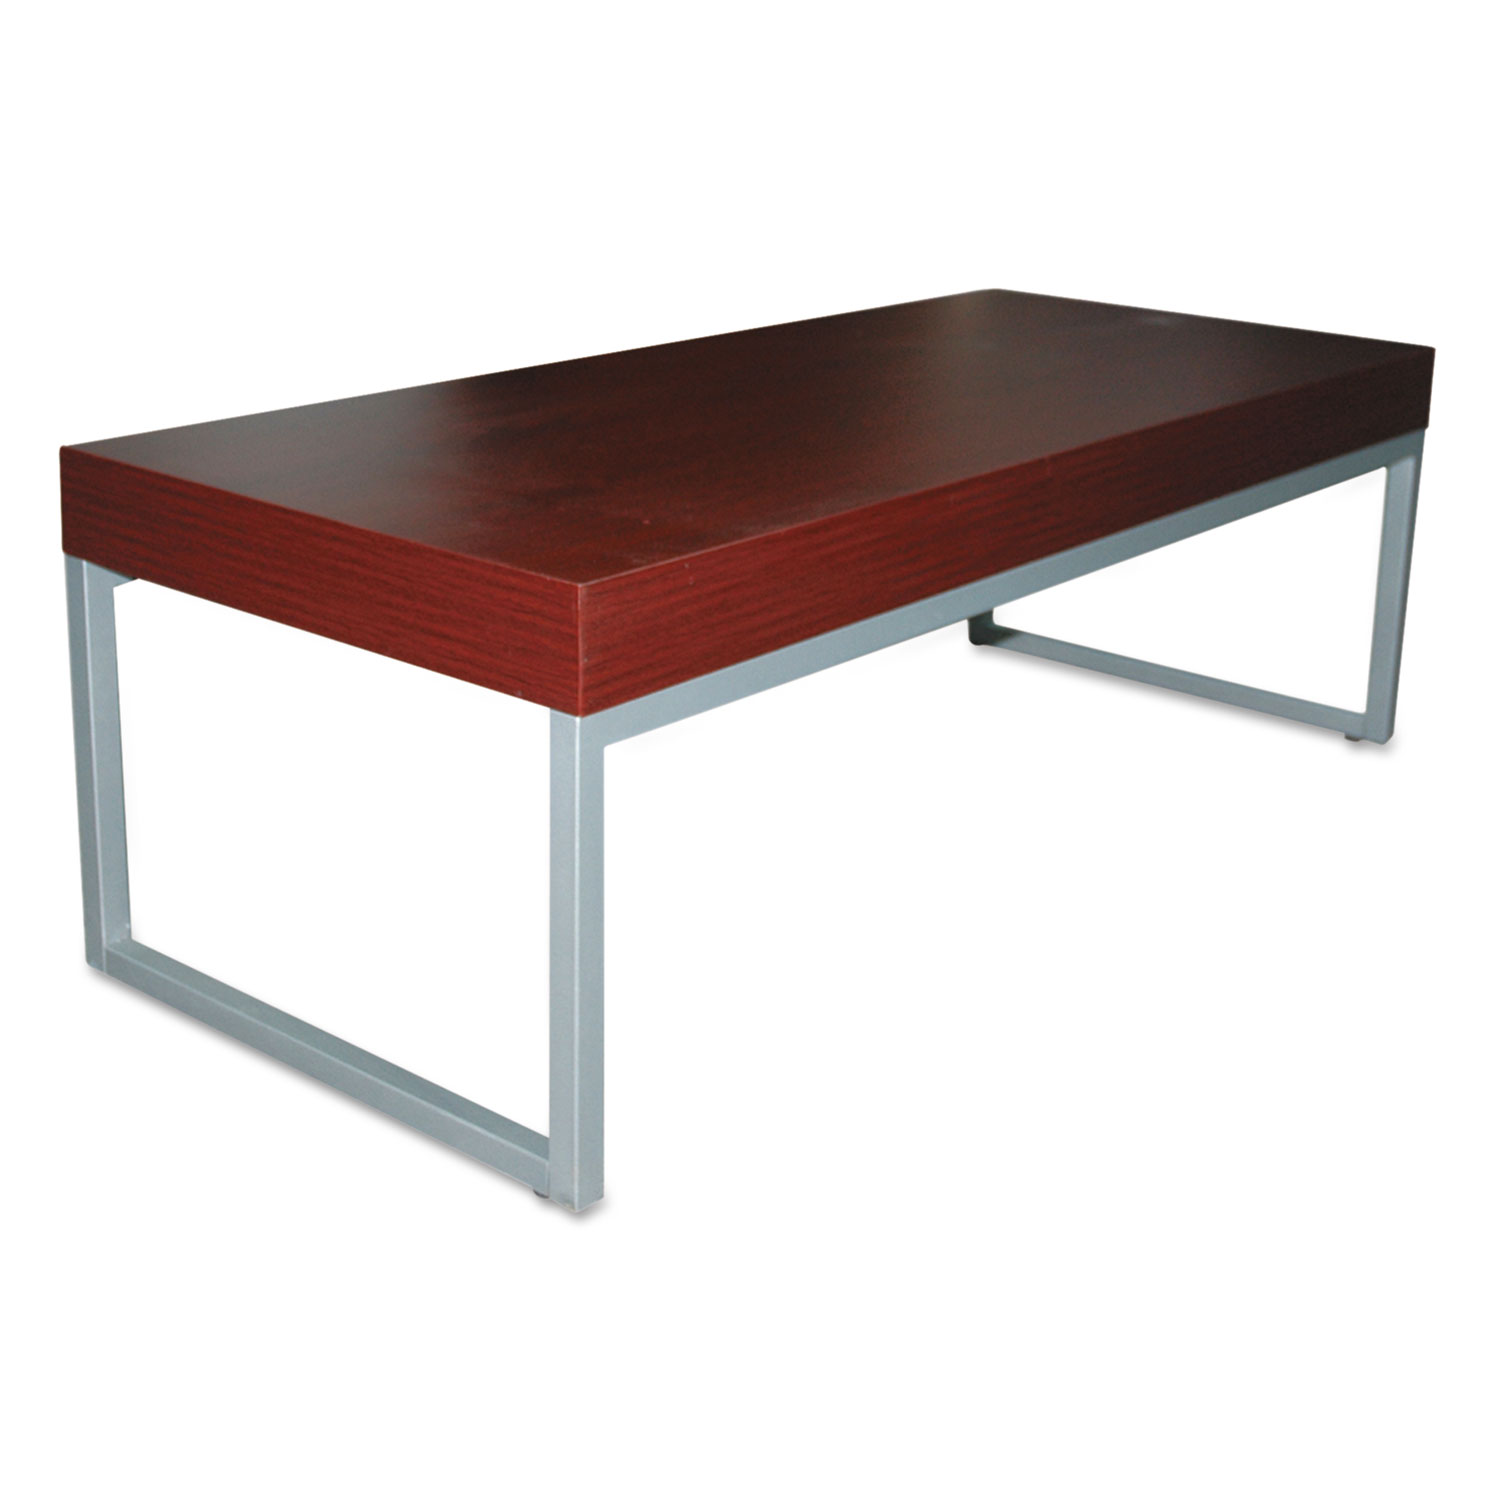 Occasional Coffee Table, 47 1/4w x 20d x 16h, Mahogany/Silver